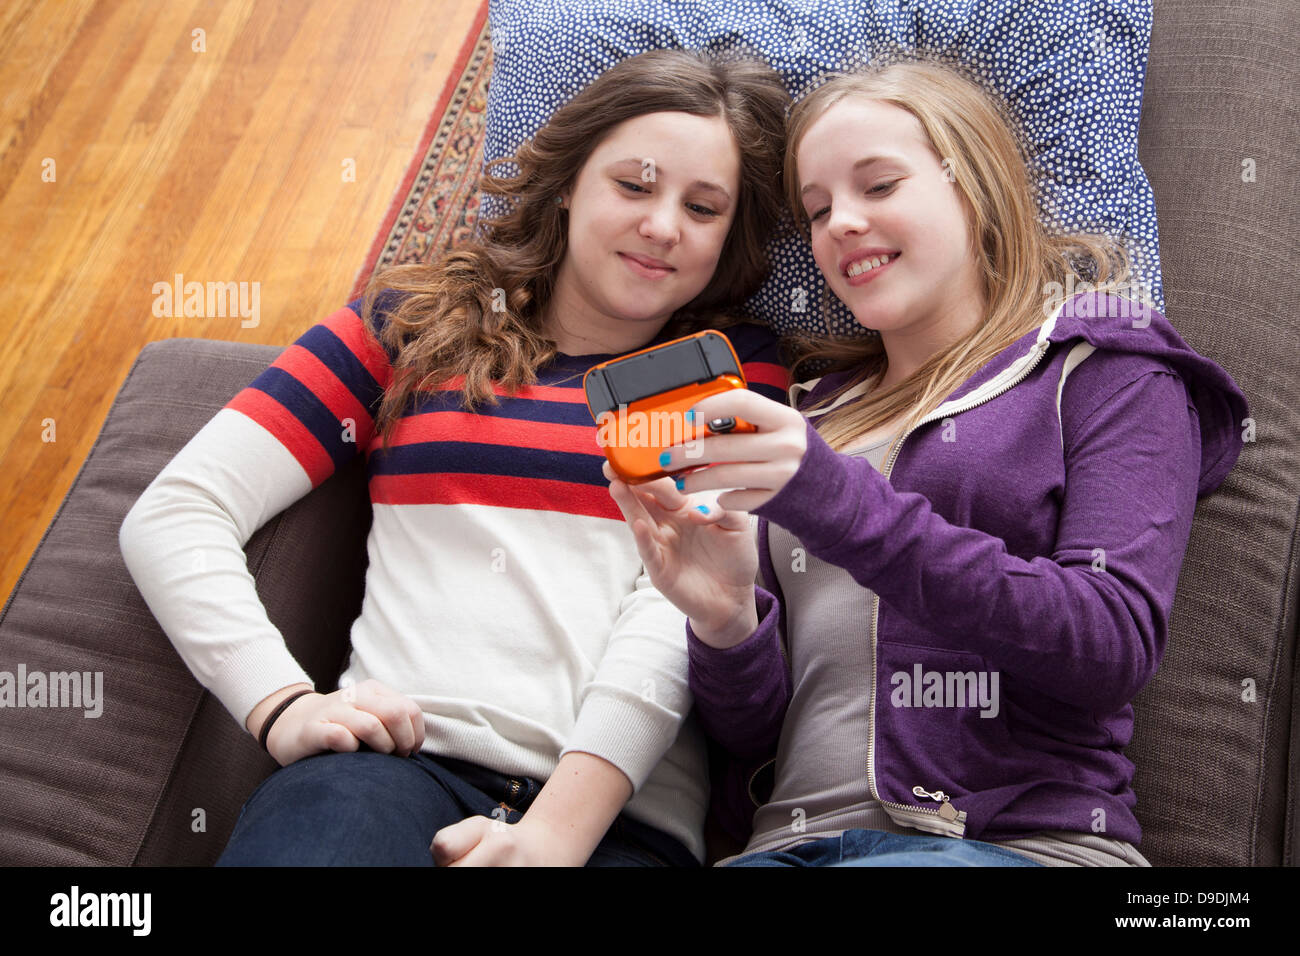 Girls lying on sofa playing handheld video game Banque D'Images